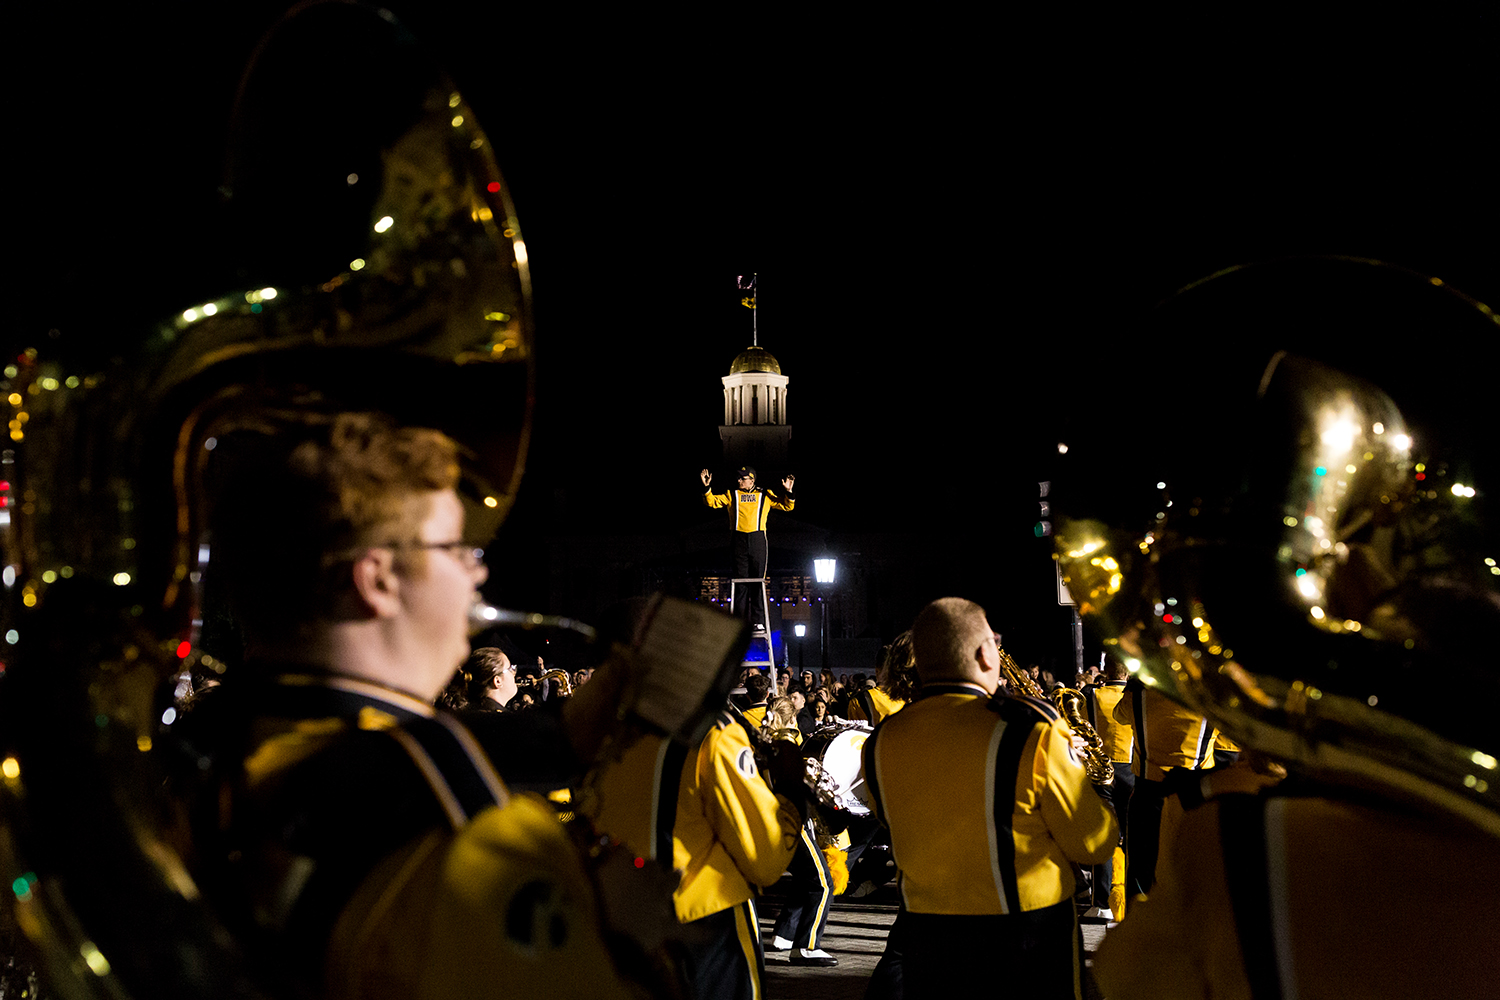  A member of the University of Iowa Marching Band directs the band during the 2018 Homecoming Parade in Iowa City on Friday, Oct. 19, 2019.  